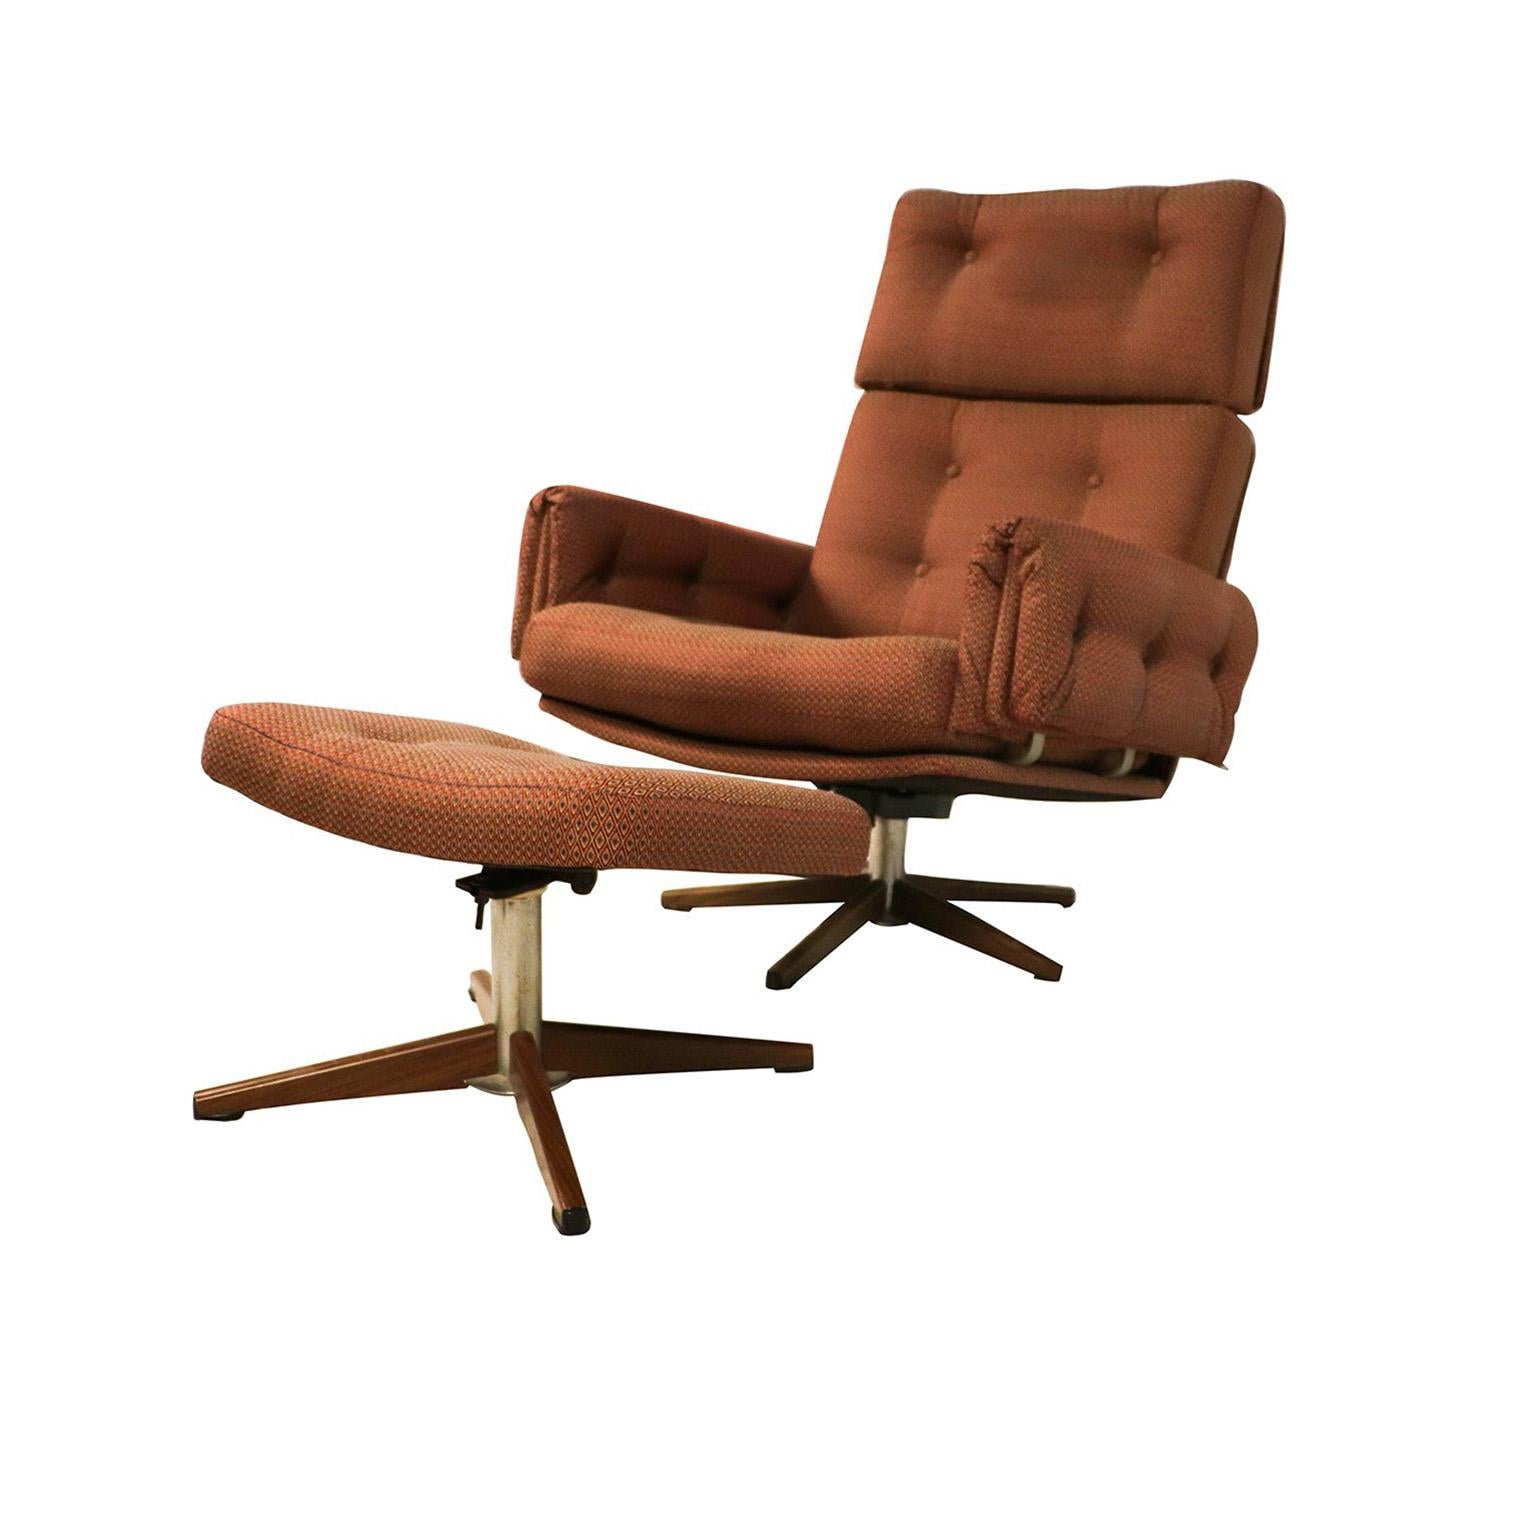 American Midcentury Lounge Chair and Ottoman